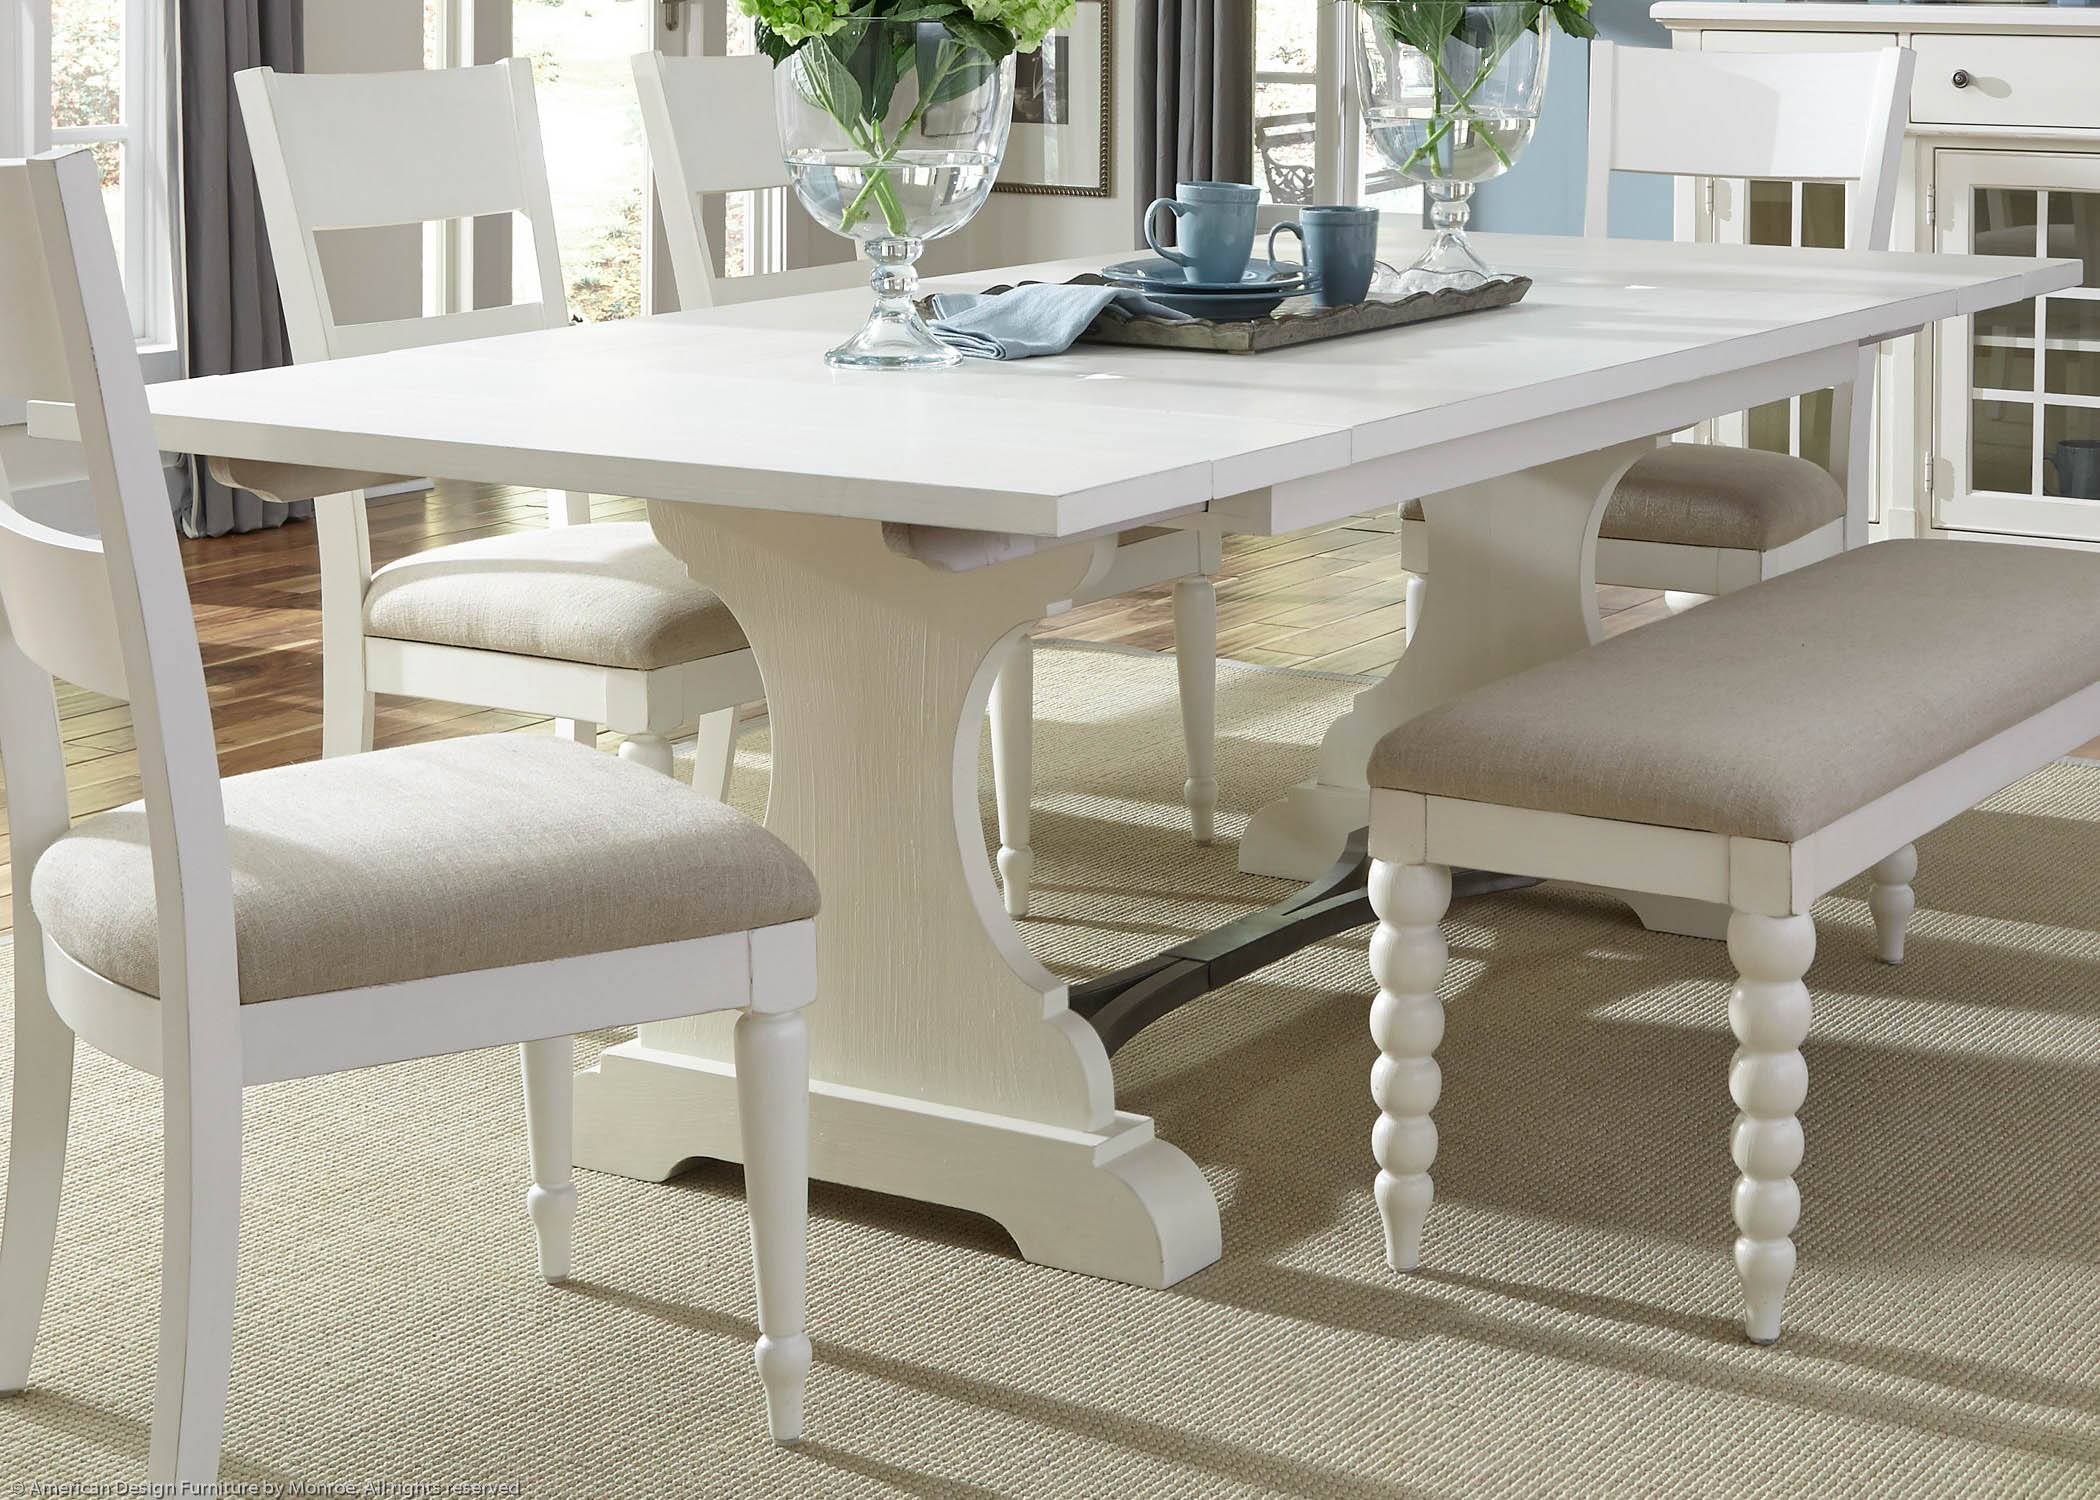 Potomac Casual Table Pic 2 (Heading Trestle Table)